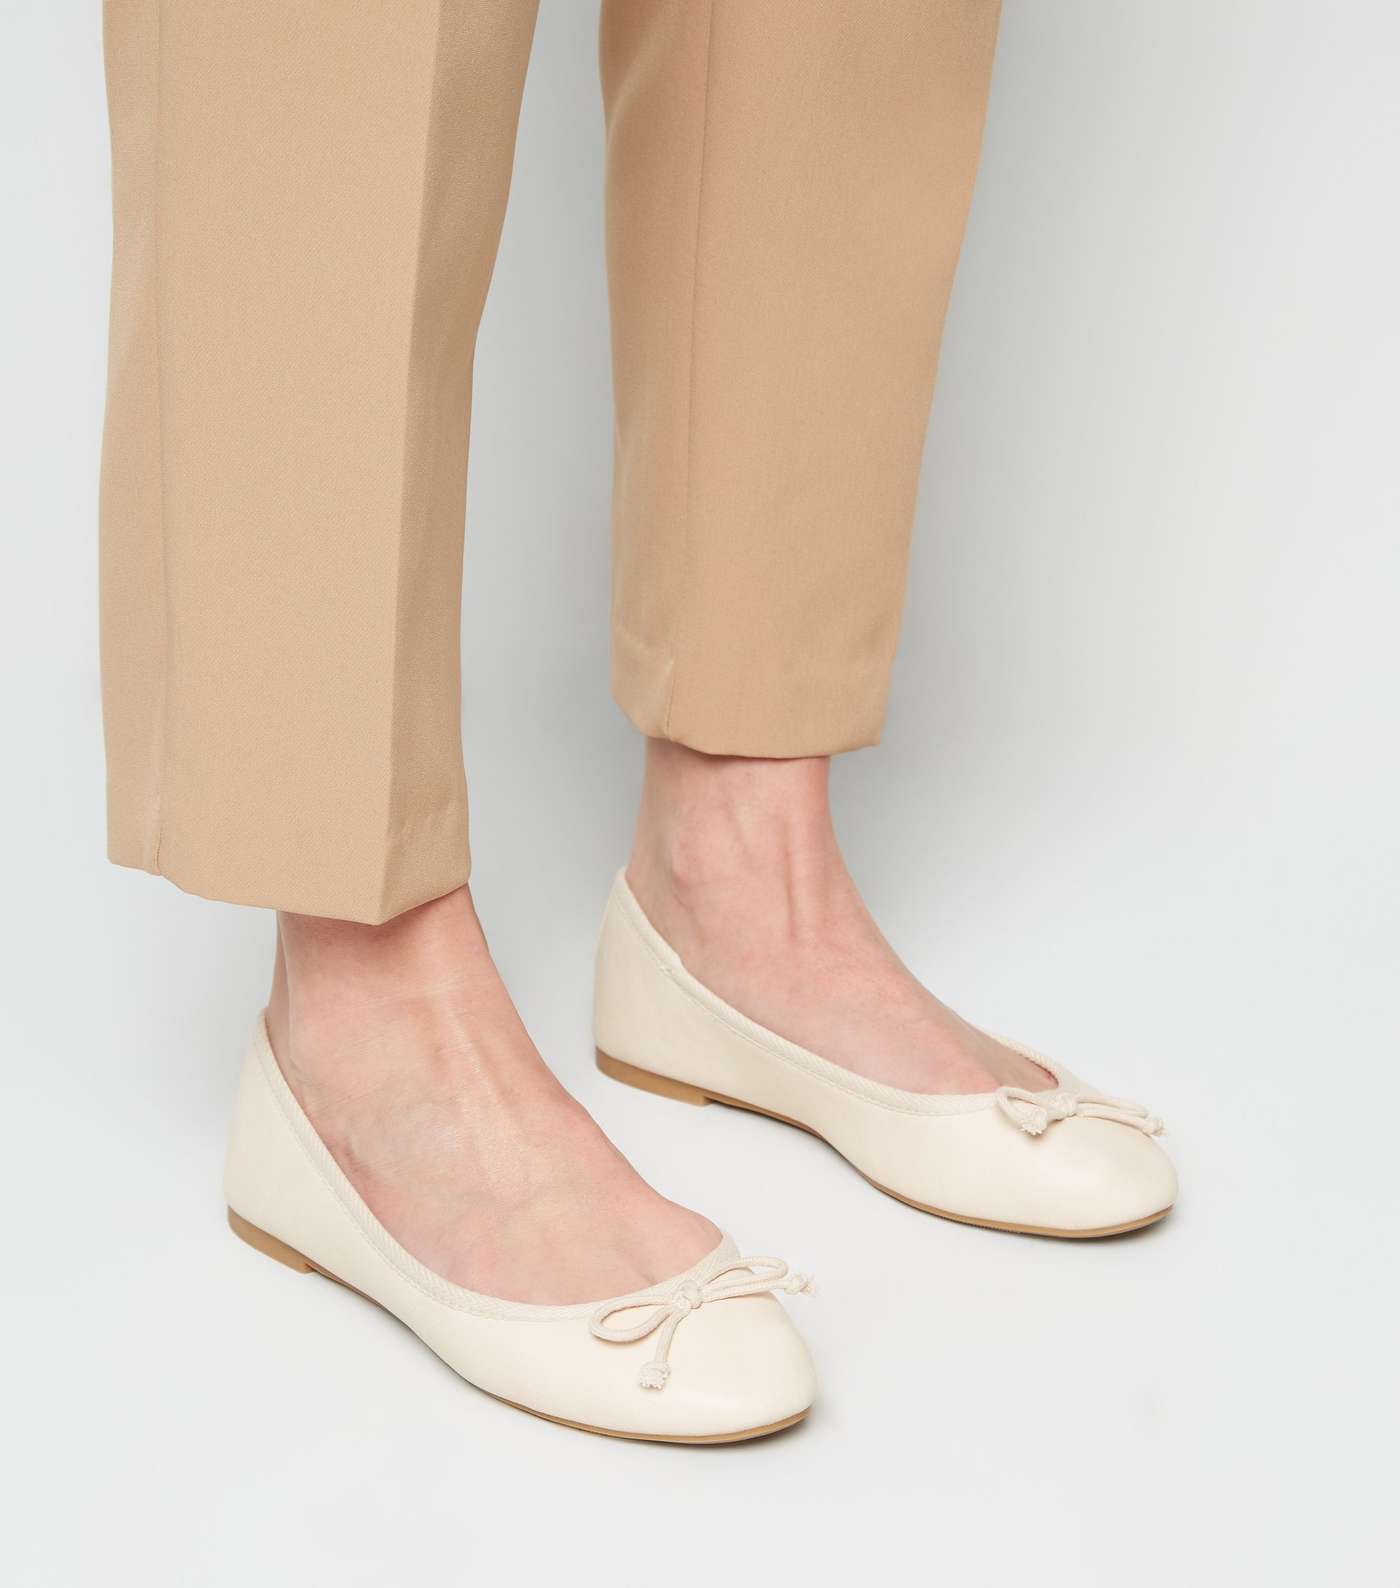 Off White Leather-Look Ballet Pumps Image 2